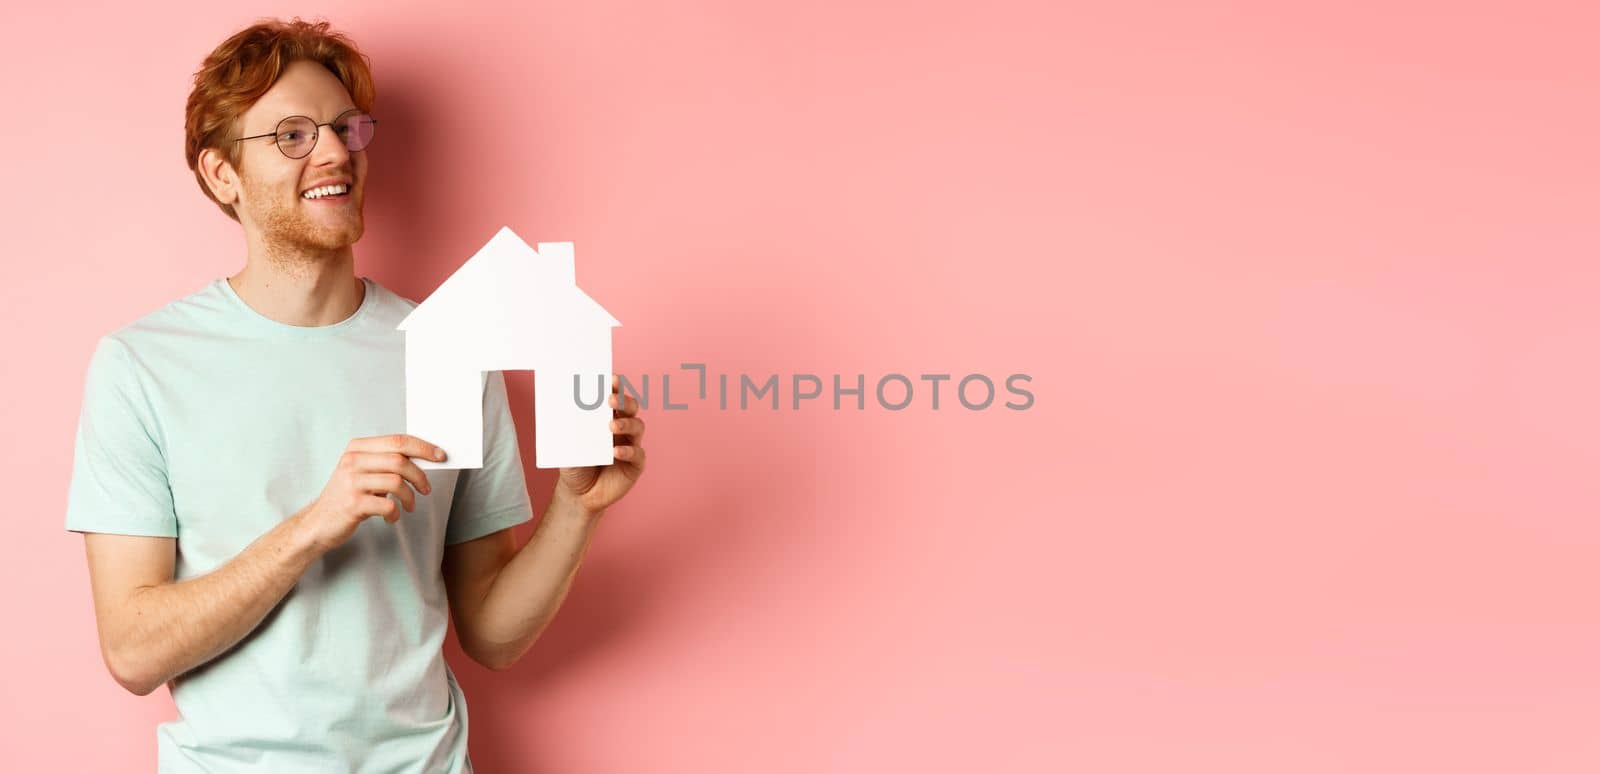 Real estate. Happy redhead man dreaming of buying property, looking right and showing paper house cutout, standing over pink background.